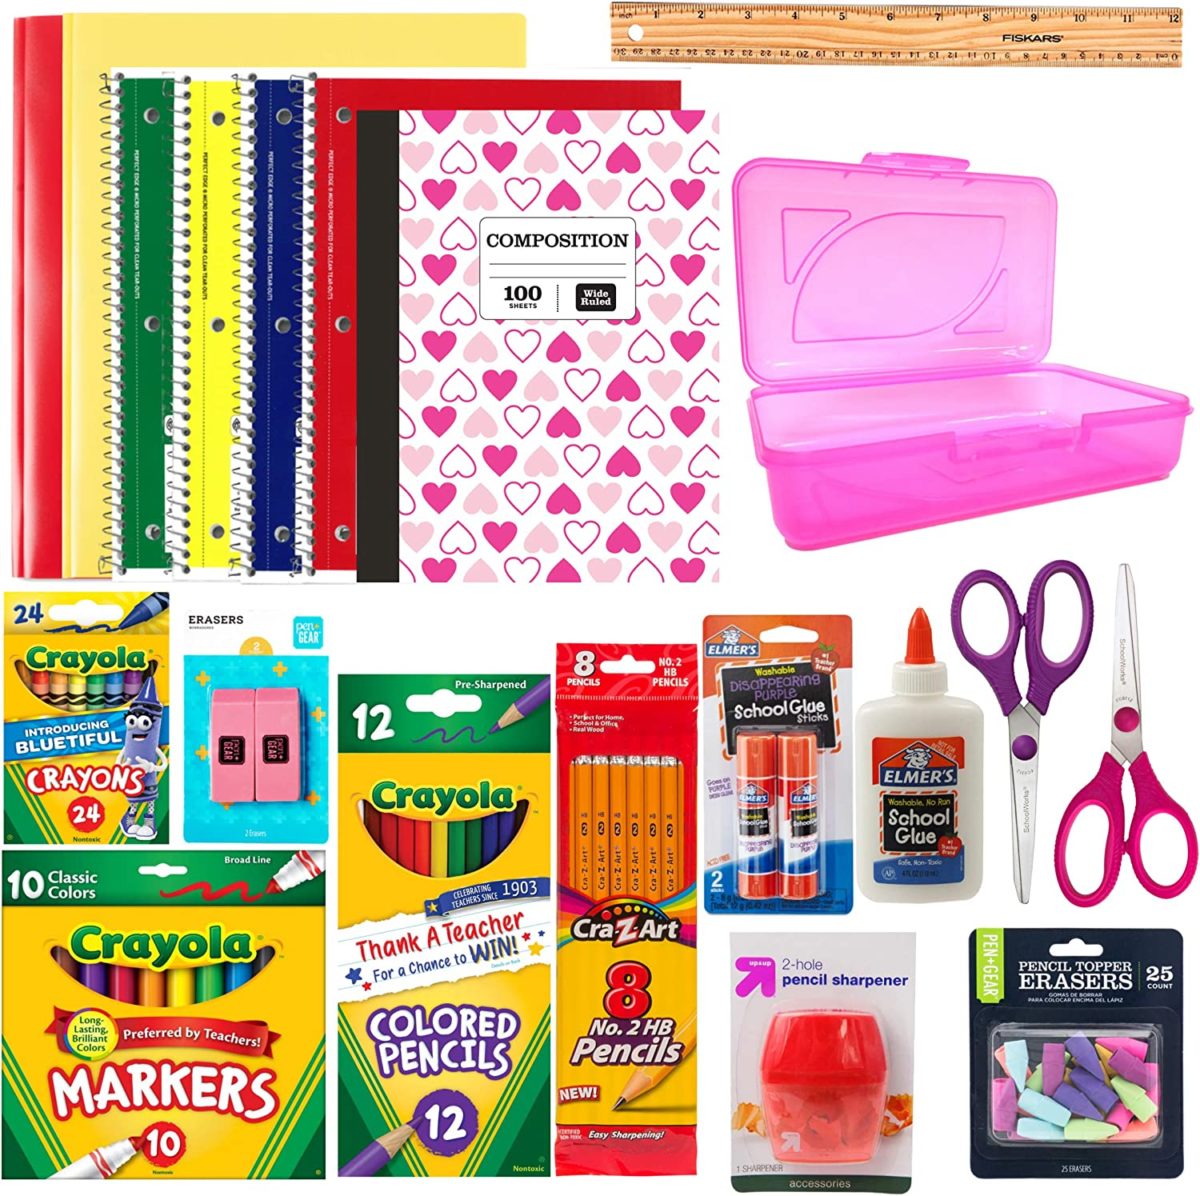 back-to-school supply kits from amazon